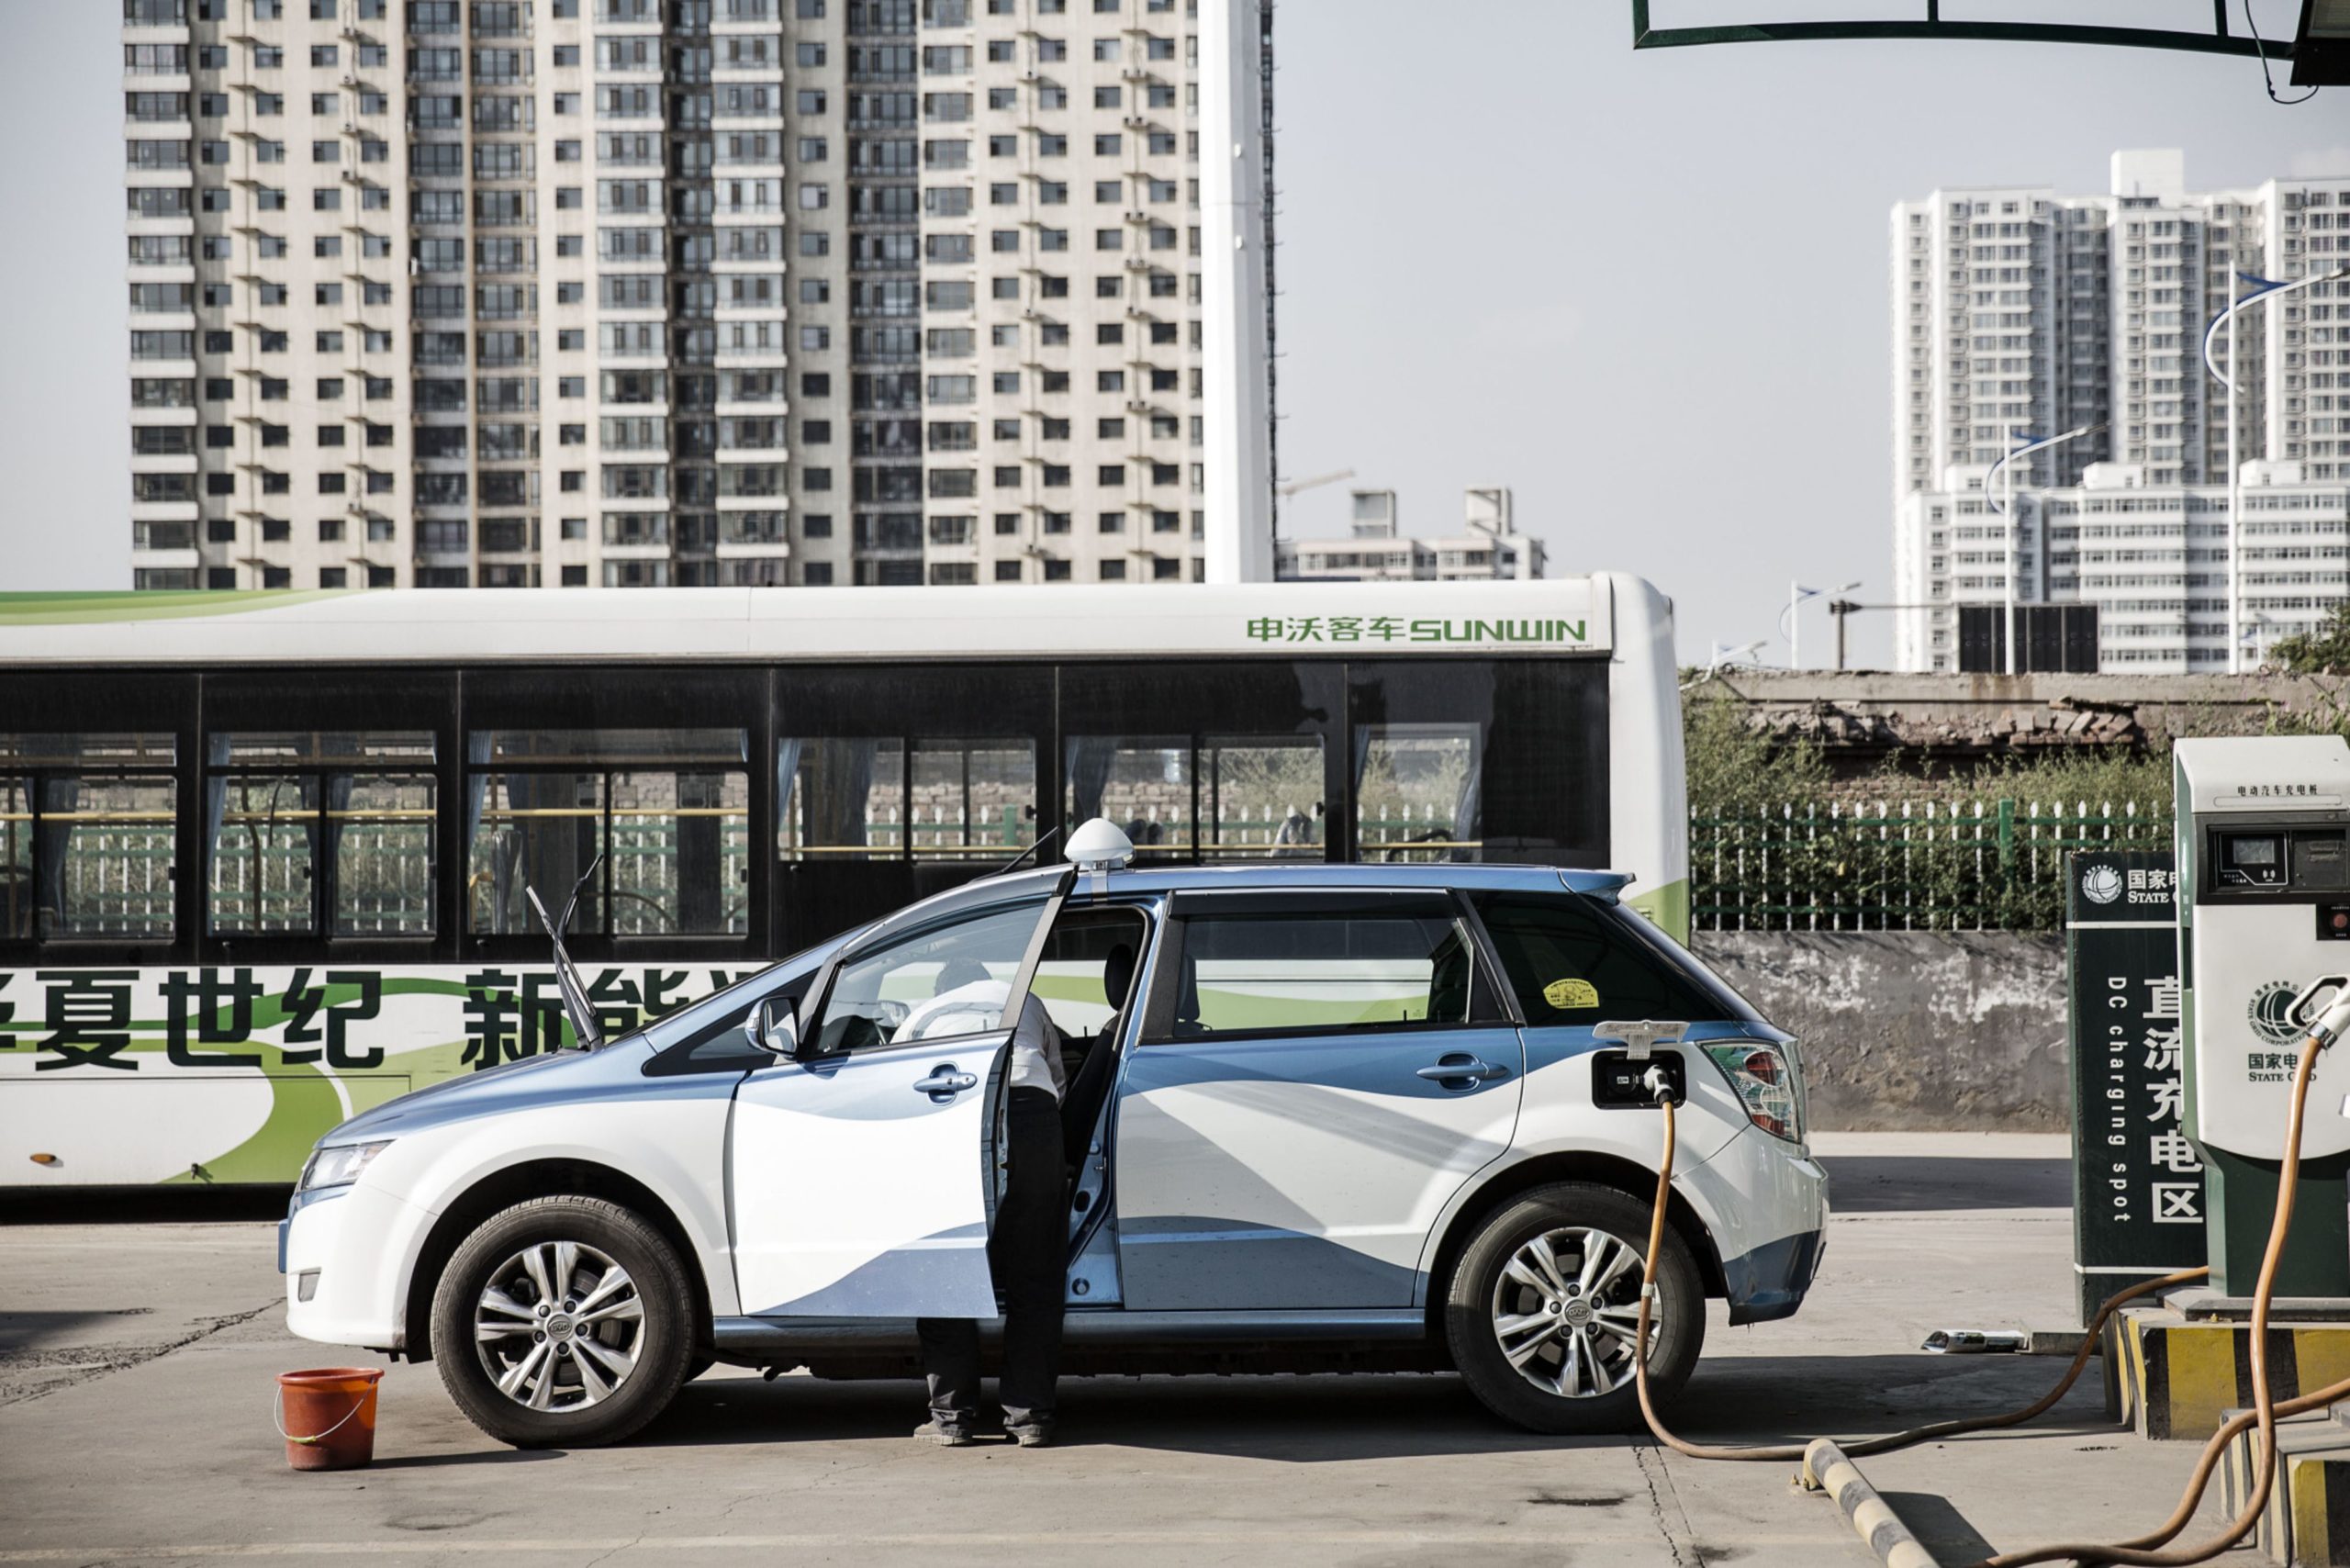 A BYD Co. E6 electric taxi stands plugged to a charger at a State Grid Corp. of China charging station in Taiyuan, Shanxi province, China, on Tuesday, Sept. 13, 2016. Taiyuan became the first city to replace its entire fleet of taxis with electric vehicles. Photographer: Qilai Shen/Bloomberg